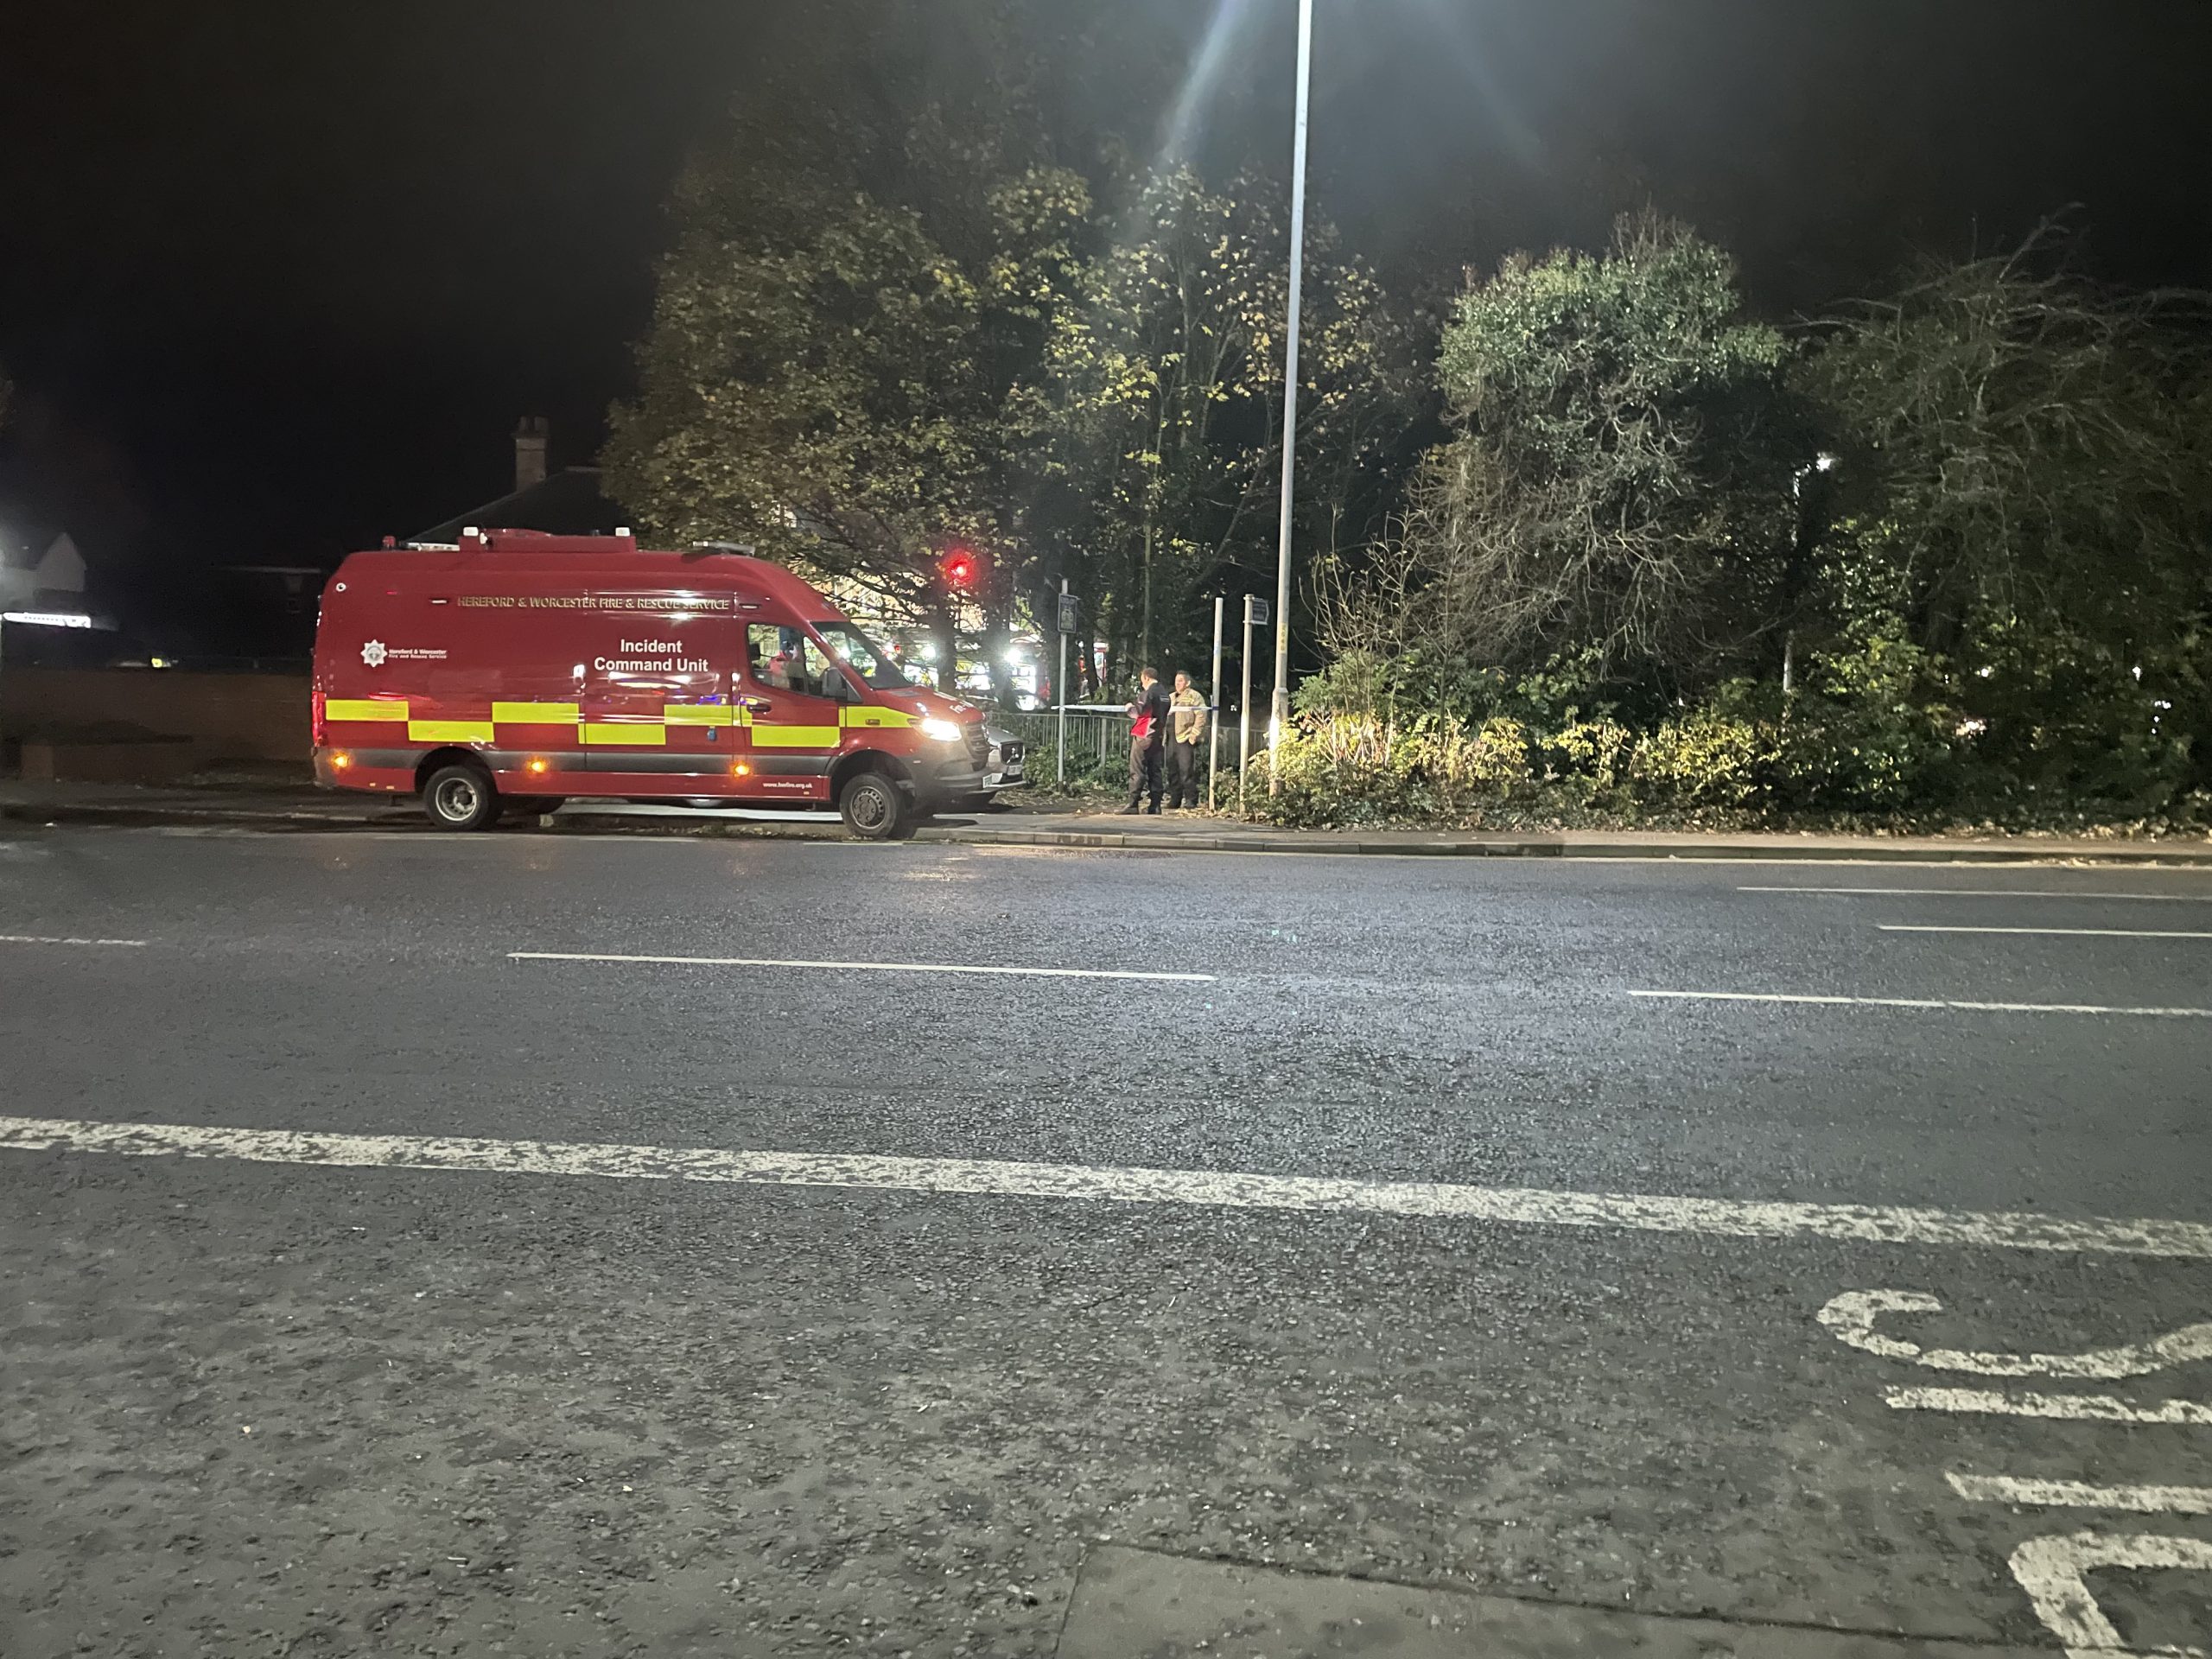 NEWS | Fire crews set to remain at scene of fire in Hereford overnight